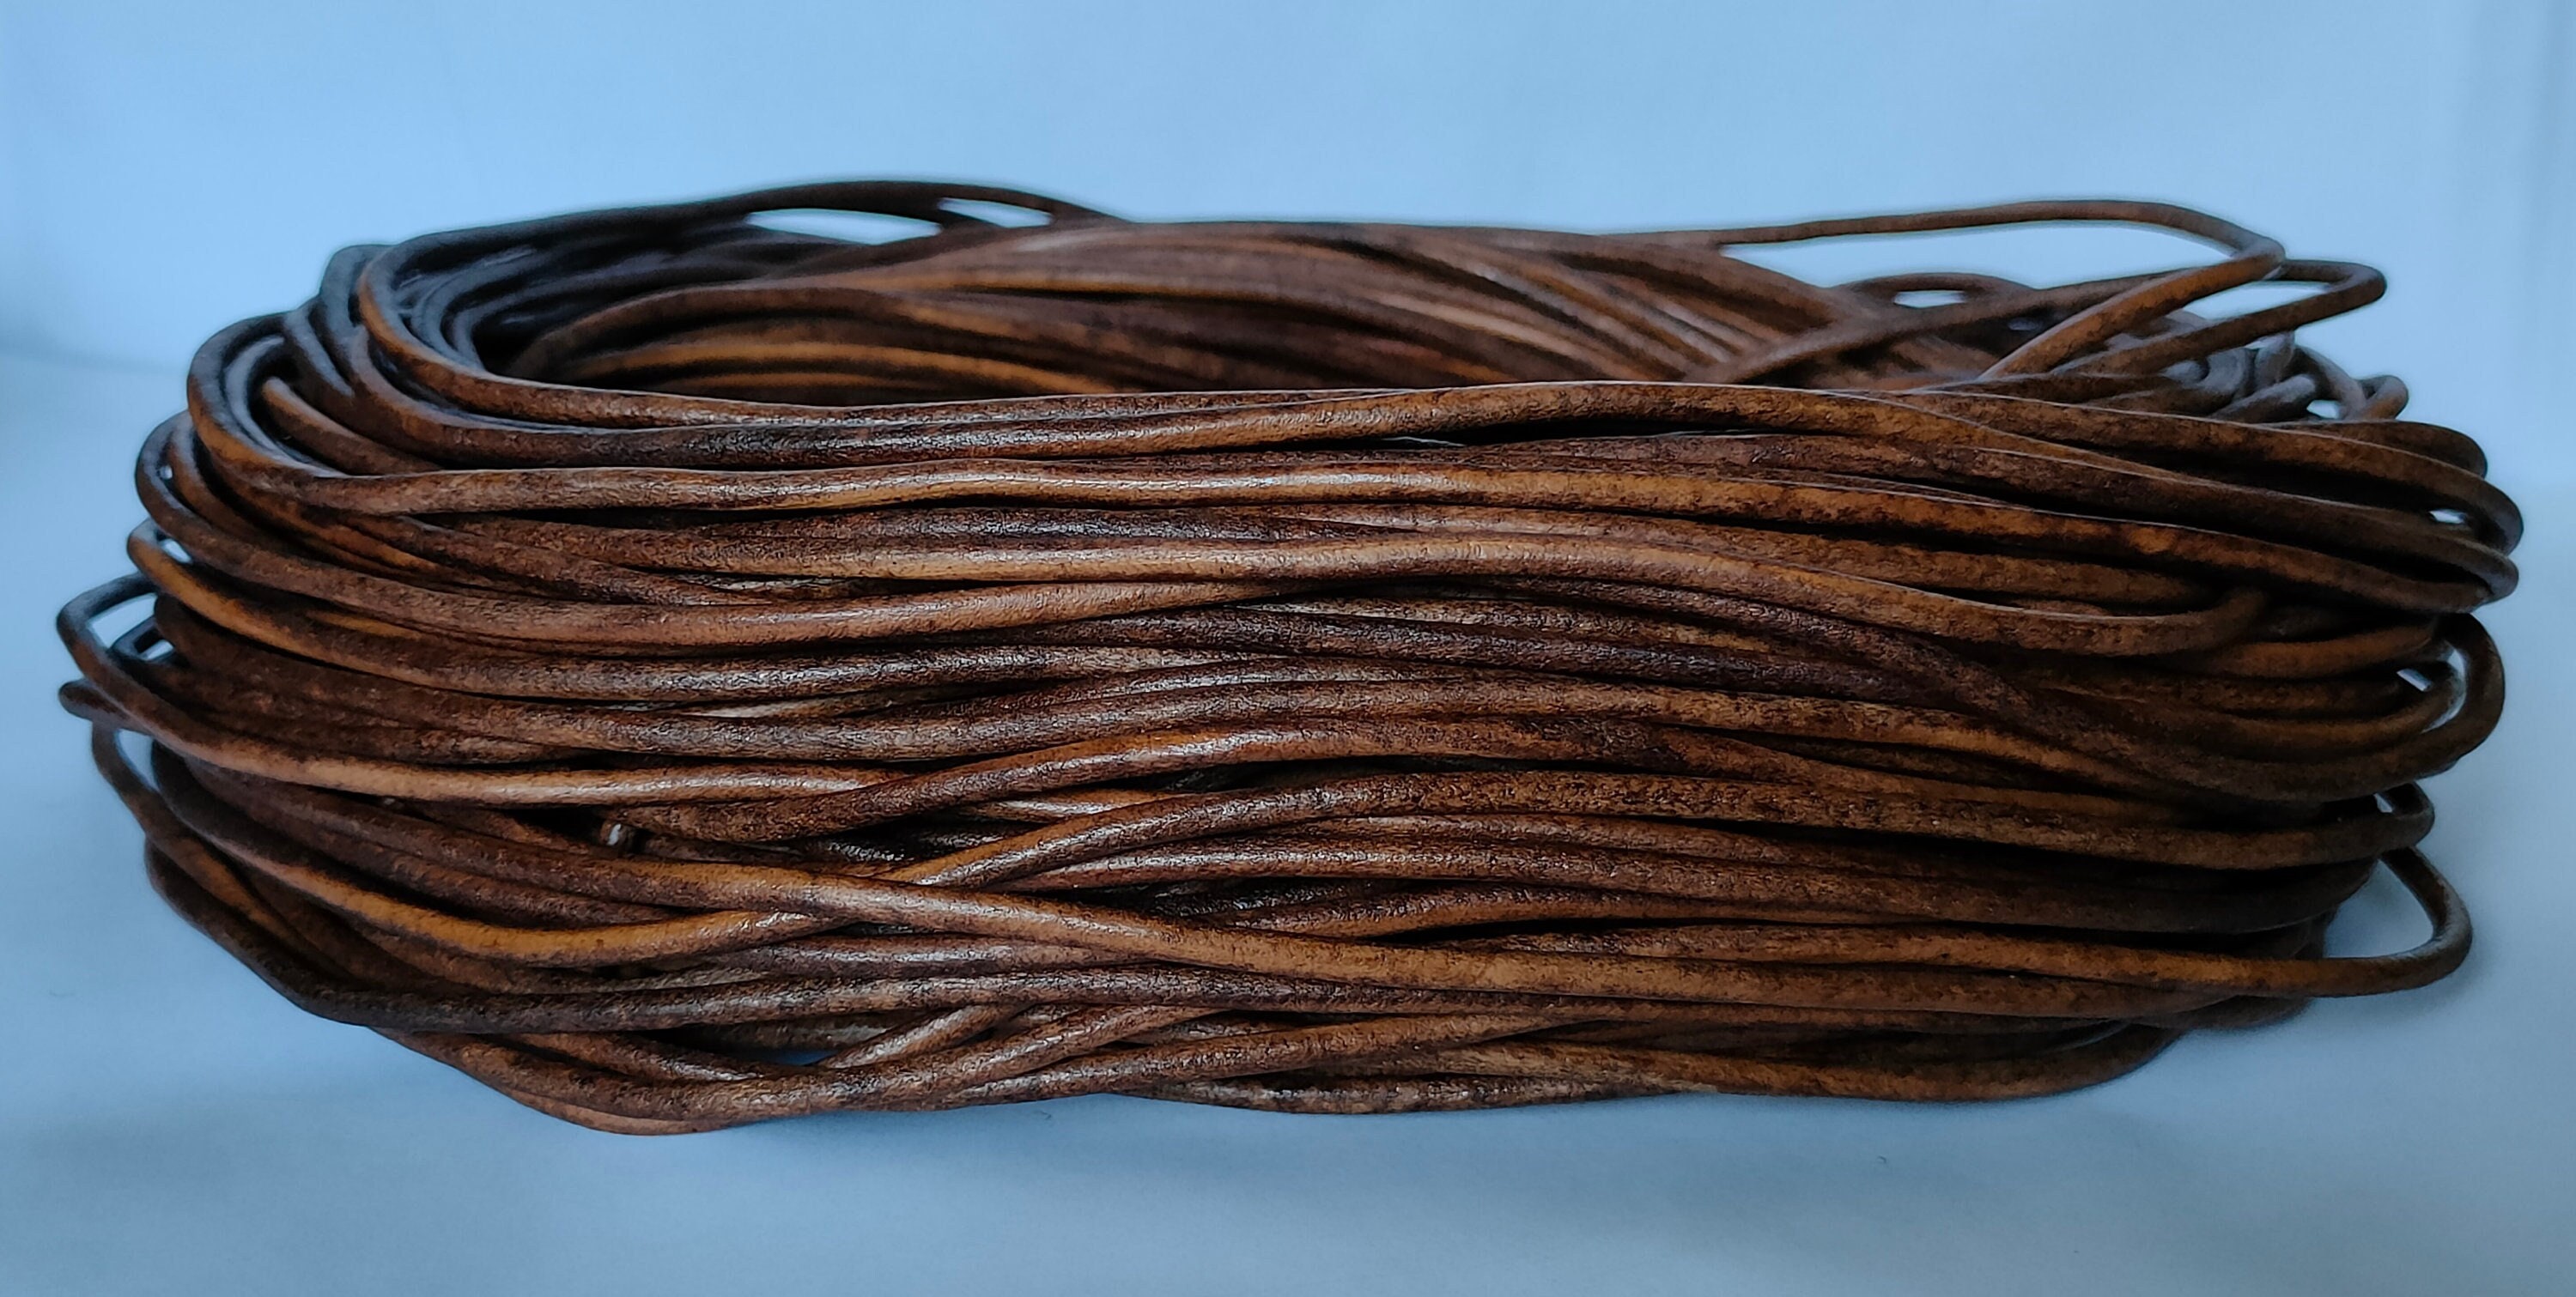 Round Leather Cord: 0.8mm 1mm 1.5mm 2mm Natural Versatile Flexible Durable  Organic Coiling Knotting Weaving Cord for DIY Jewelry Making 